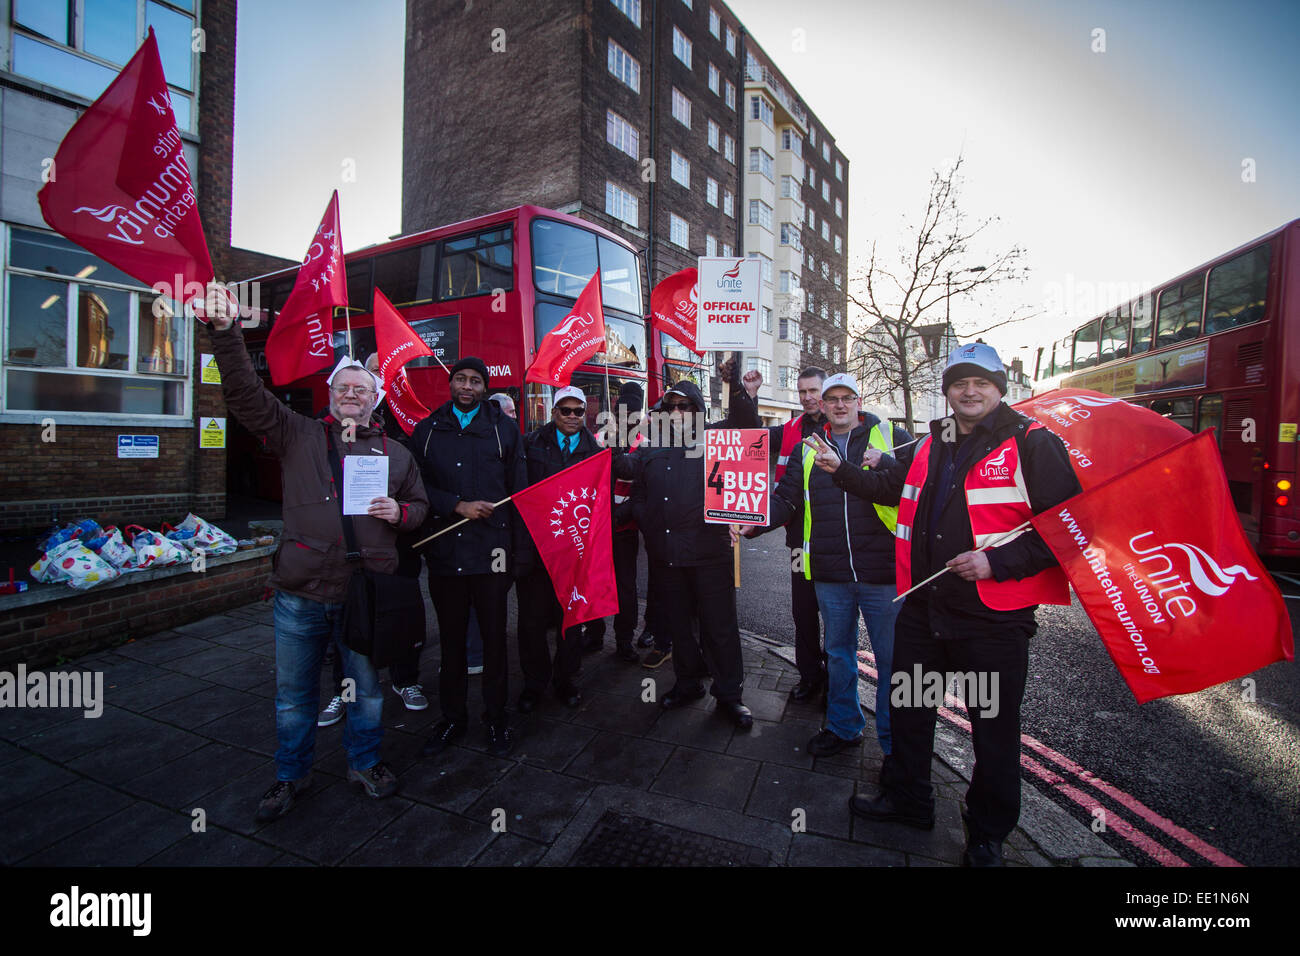 A group of Unite members striking against pay and contract differences for Bus Drivers. Unite claims there are 80 different rates of pay for drivers, with up to £3 per hour difference Stock Photo